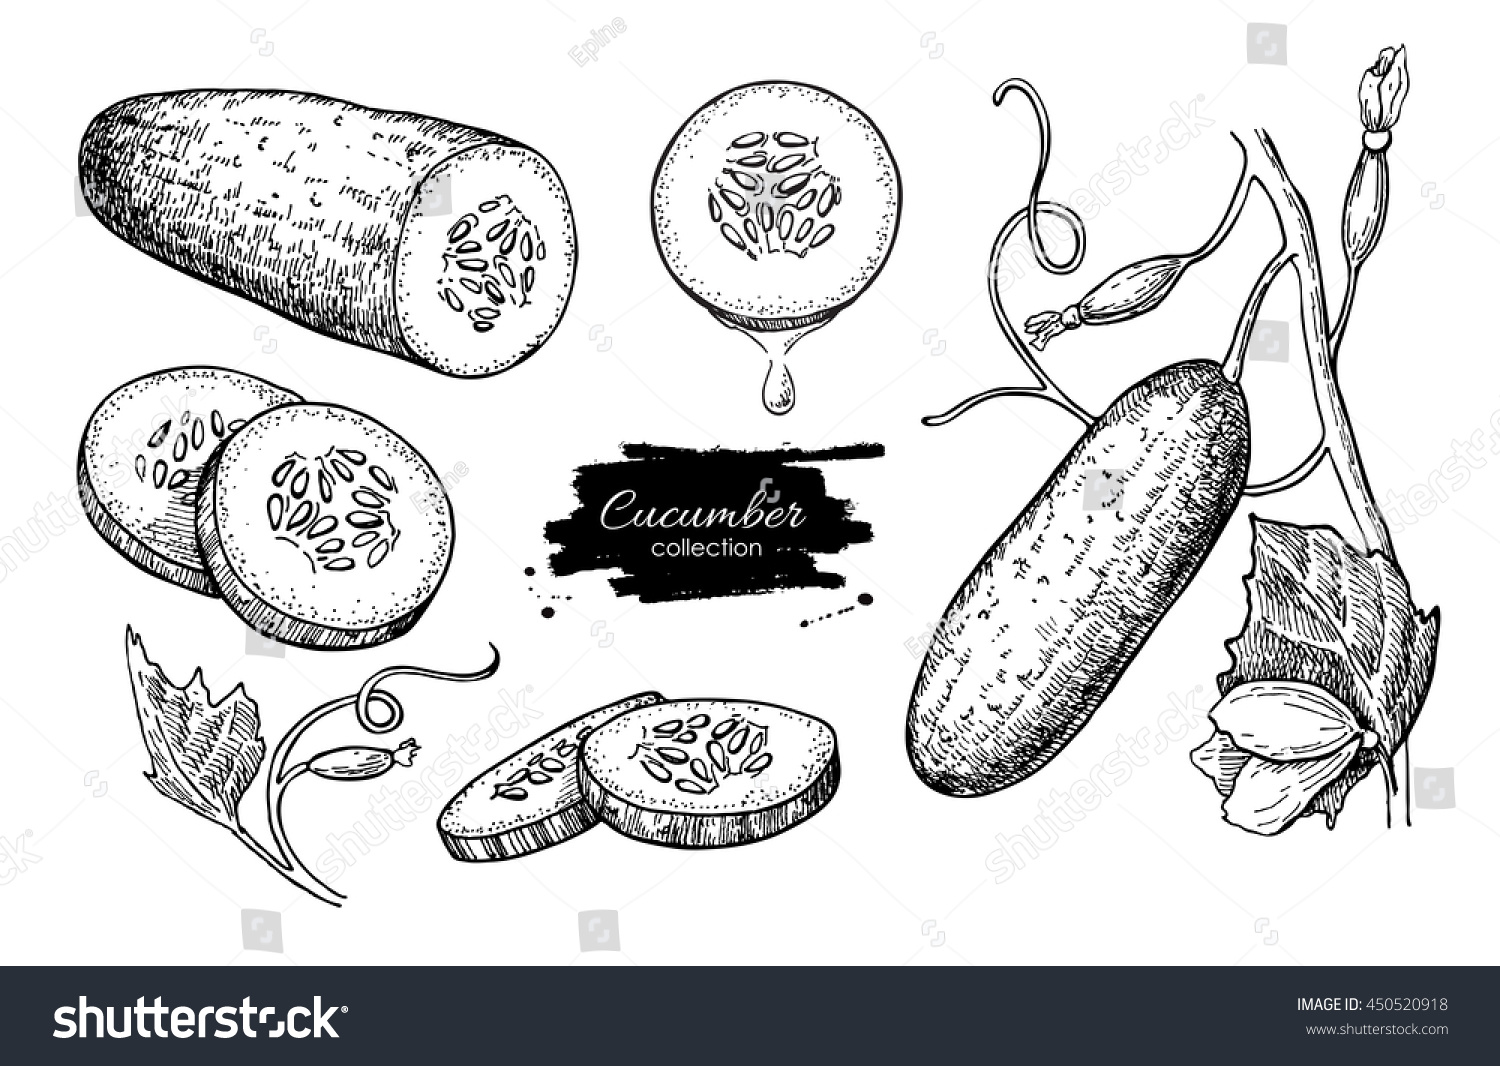 Cucumber hand drawn vector set. Isolated cucumber, sliced pieces and plant. Vegetable engraved style illustration. Detailed vegetarian food drawing. Farm market product. #450520918